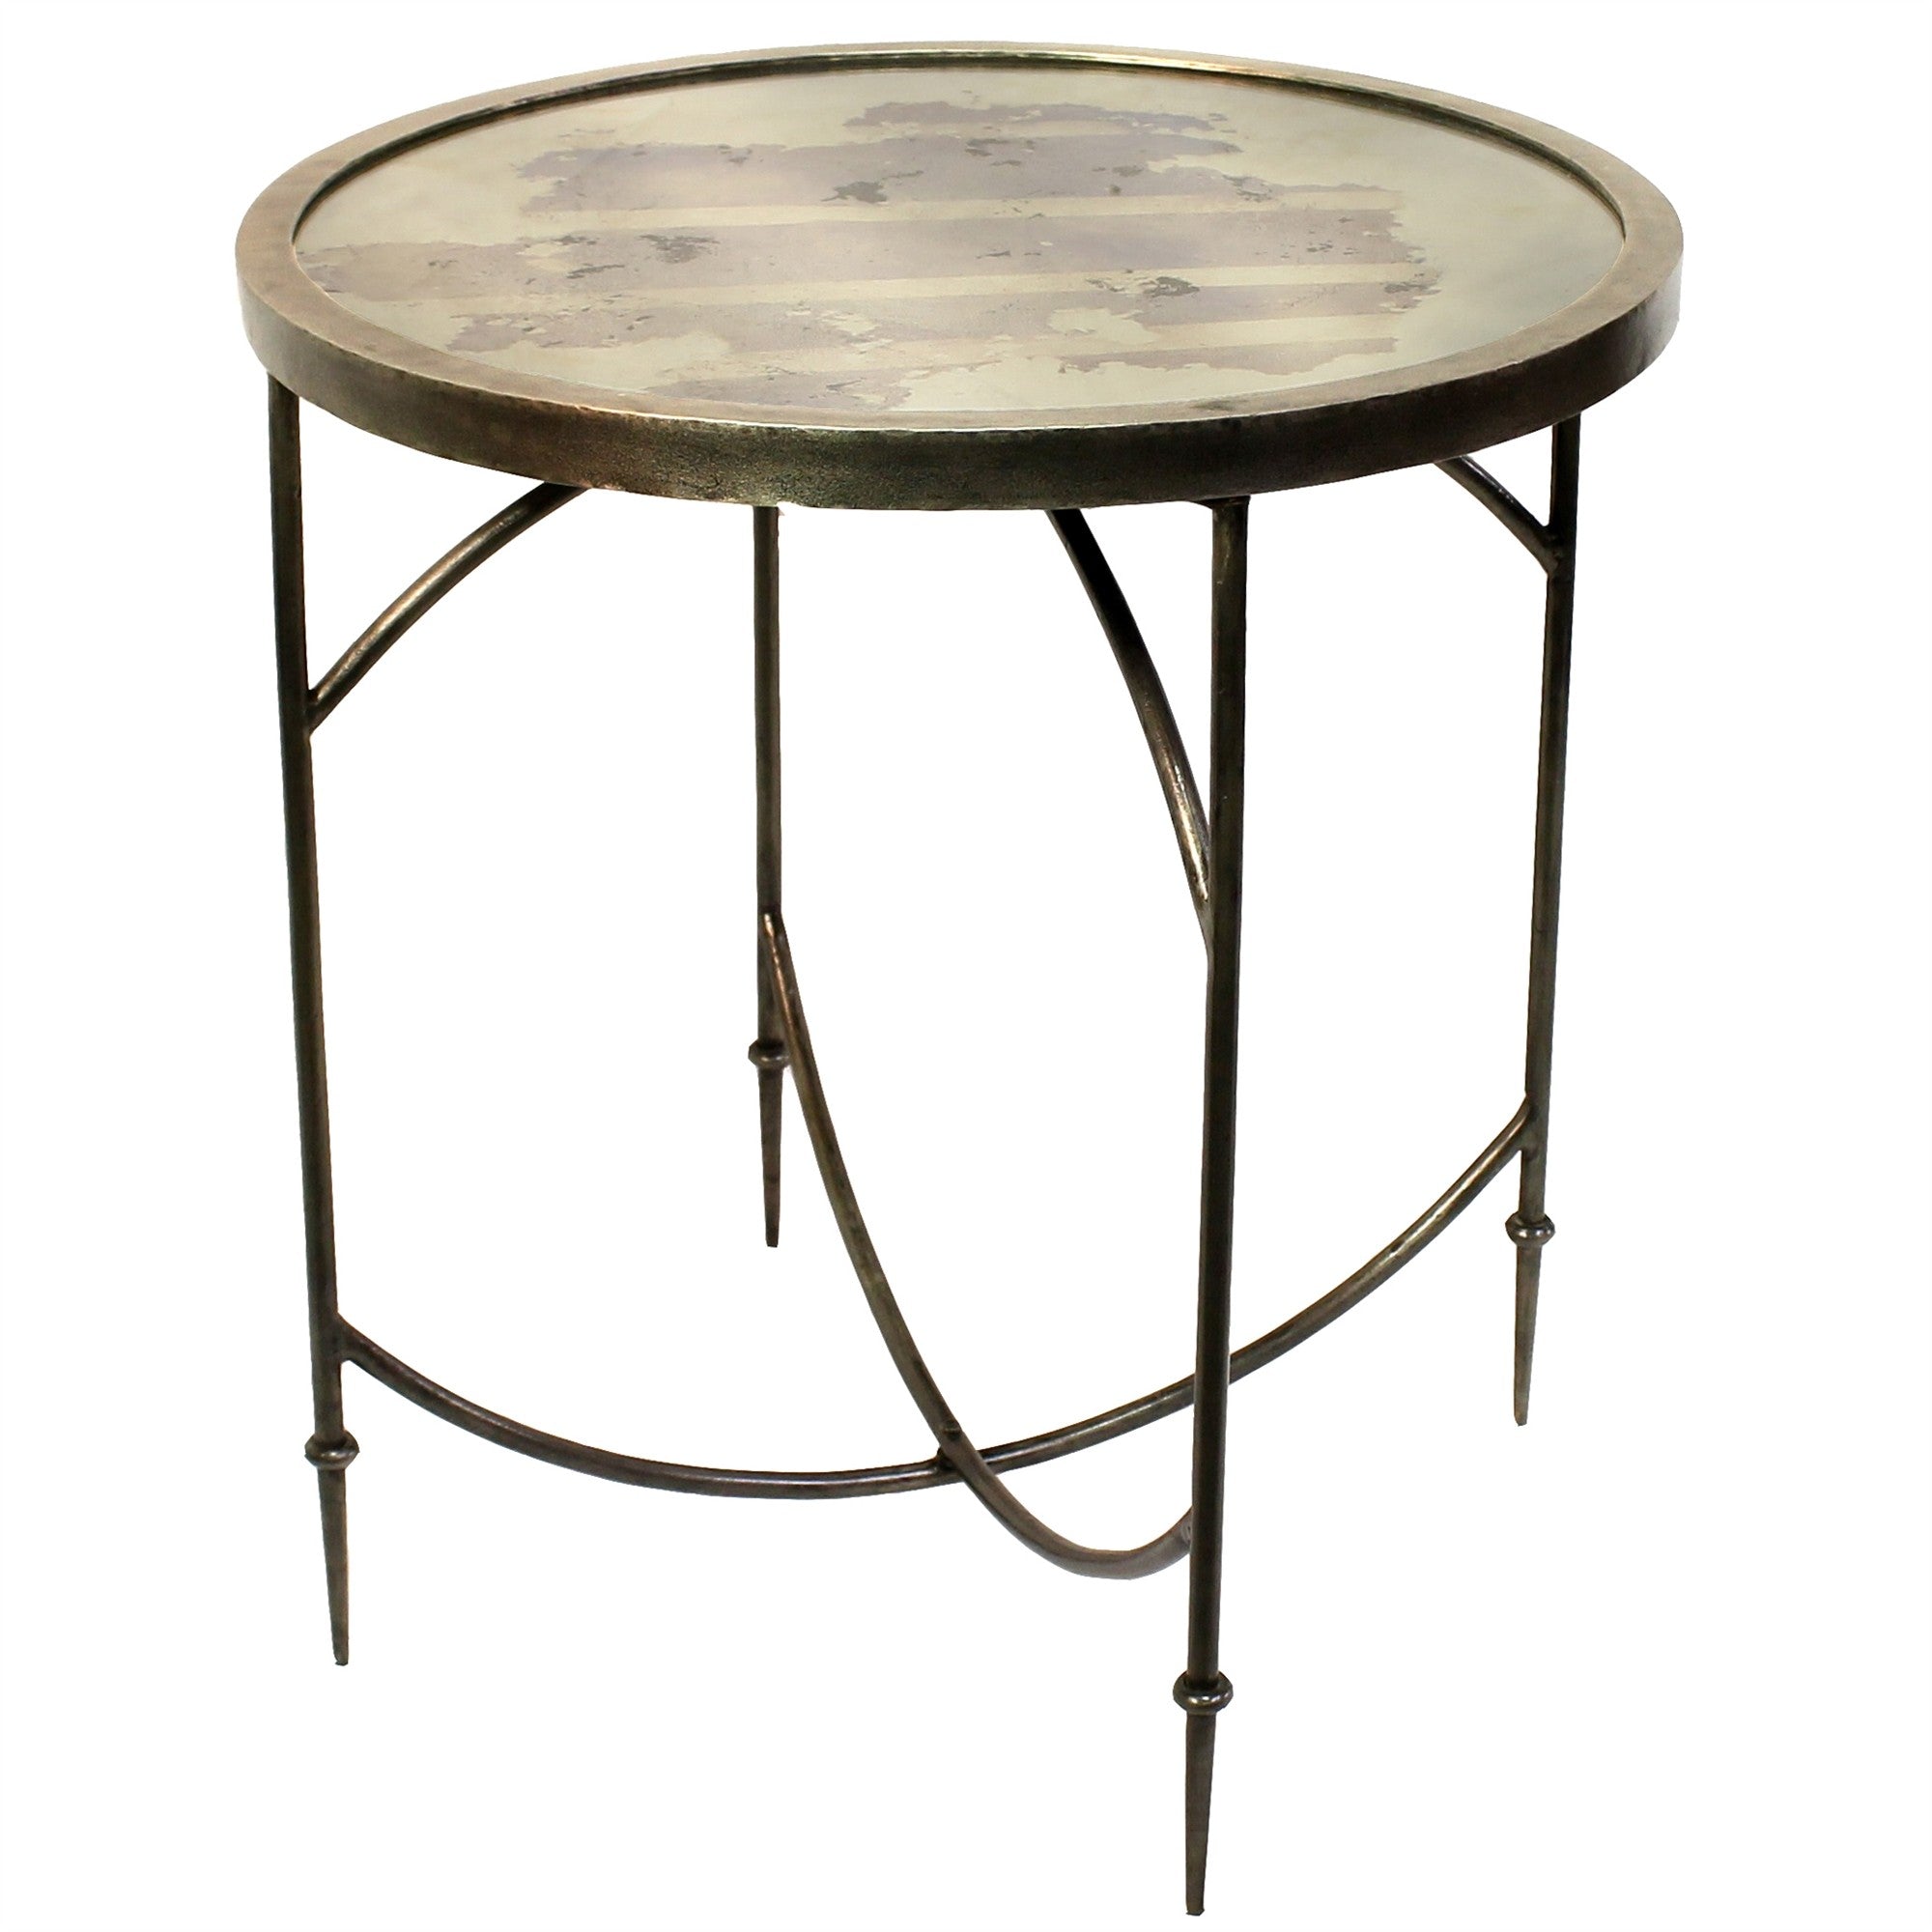 25" Nickel Iron Round Mirrored End Table